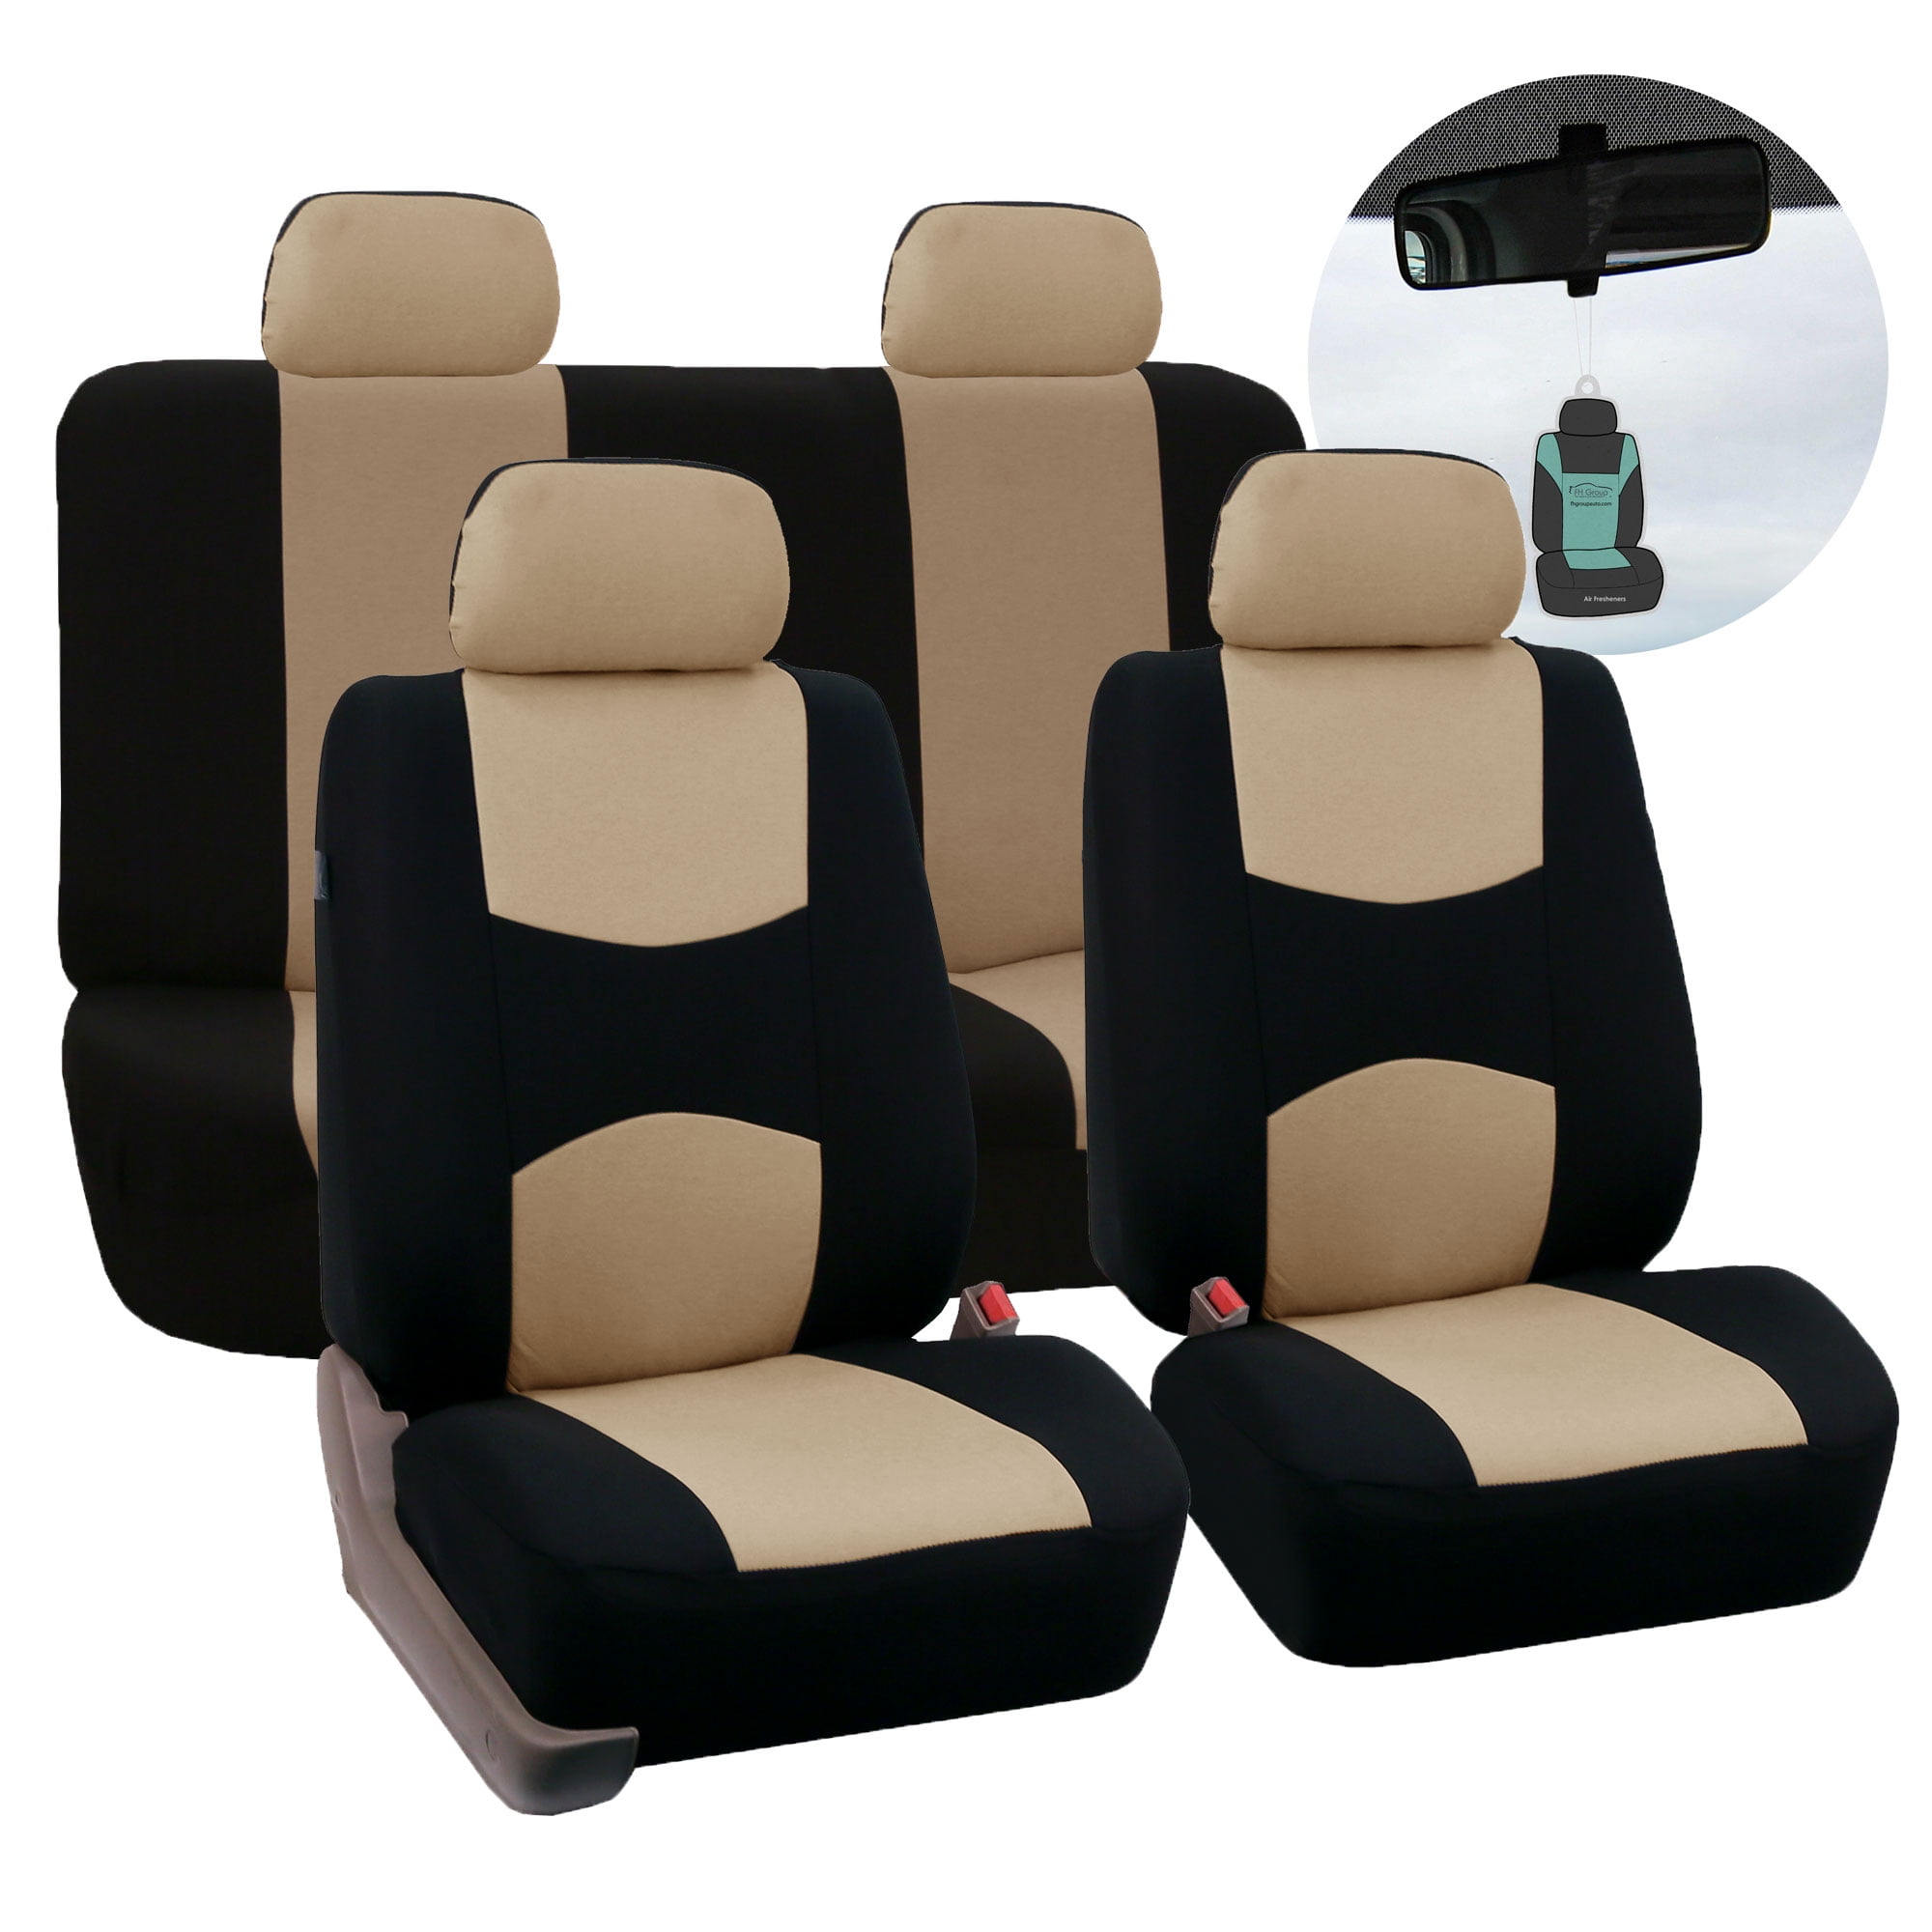  Flying Banner Car Seat Covers Full Set Protectors Fabric Sporty  Color Black Gray Red Purple Orange Rear Bench Split SUV Truck (Orange) :  Automotive